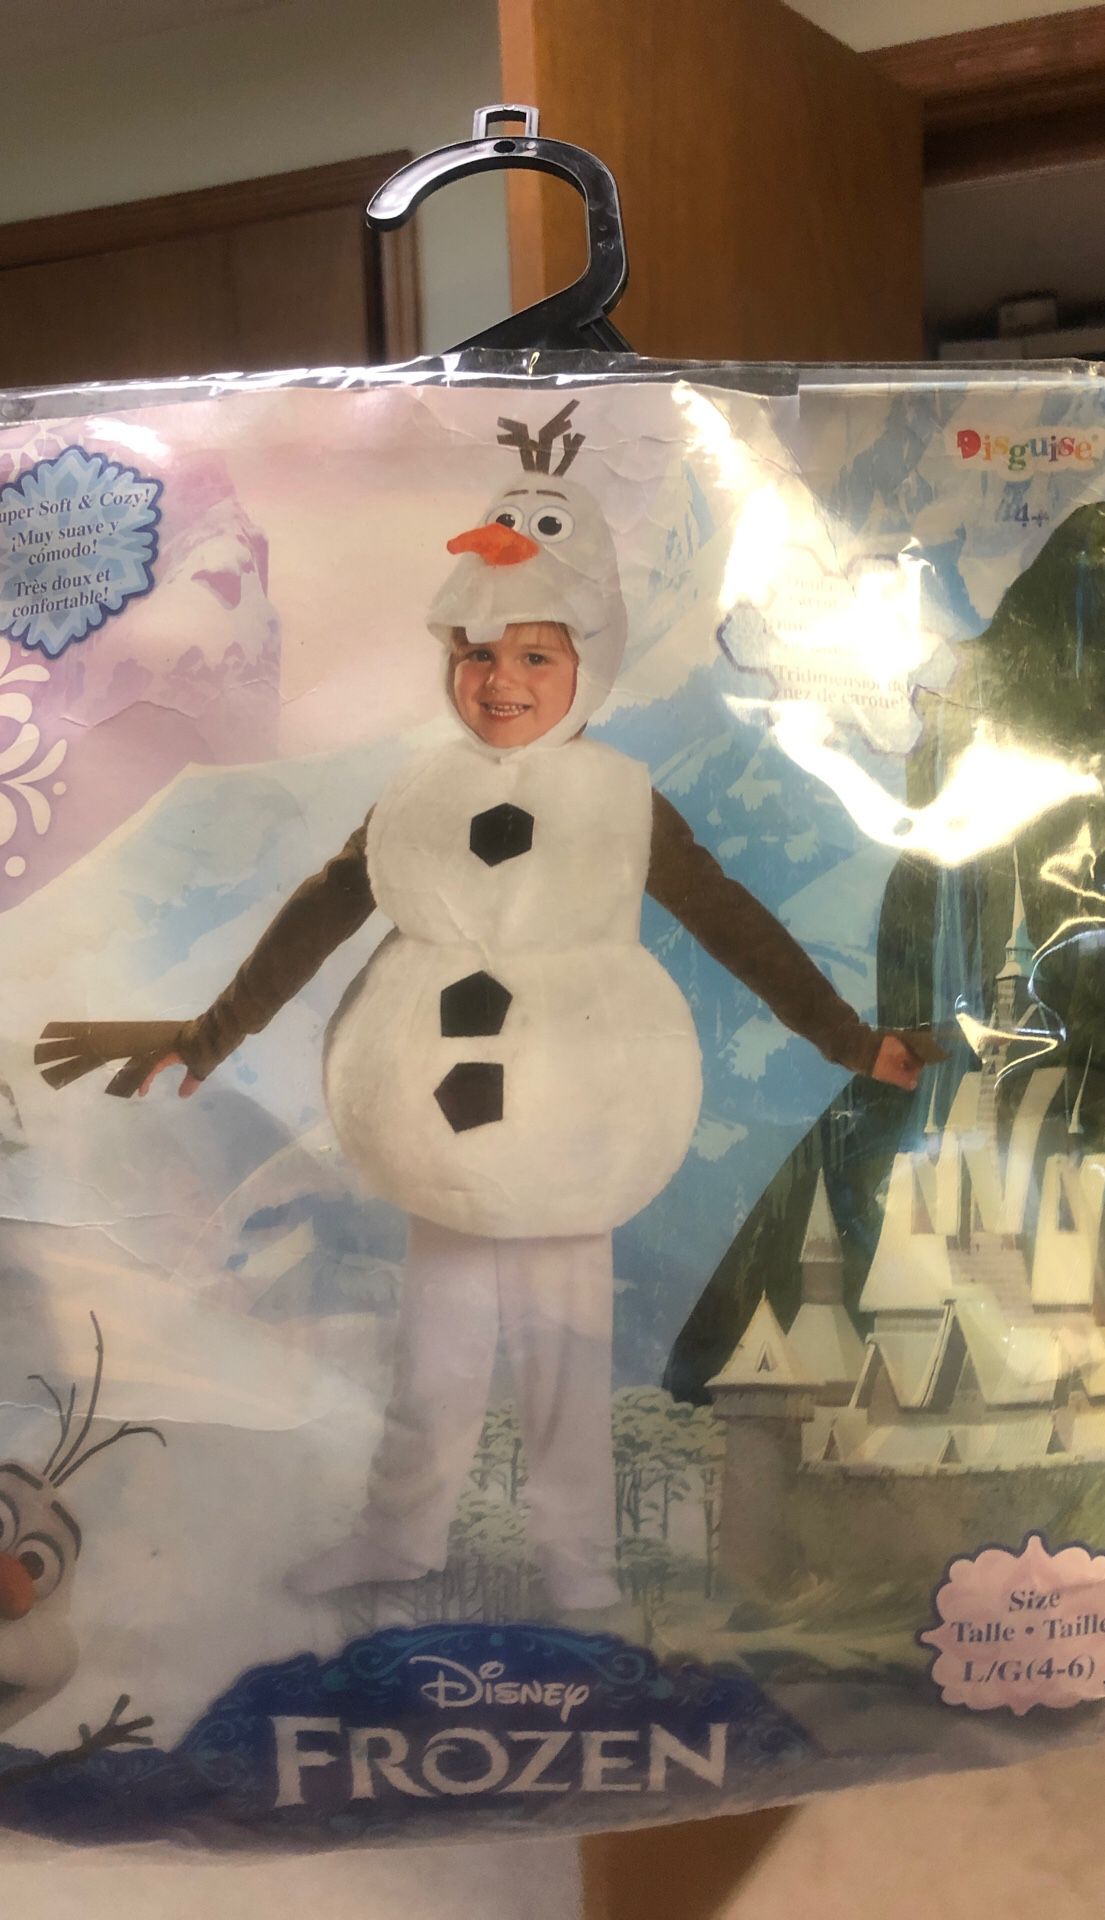 Olaf costume fits size 4-6